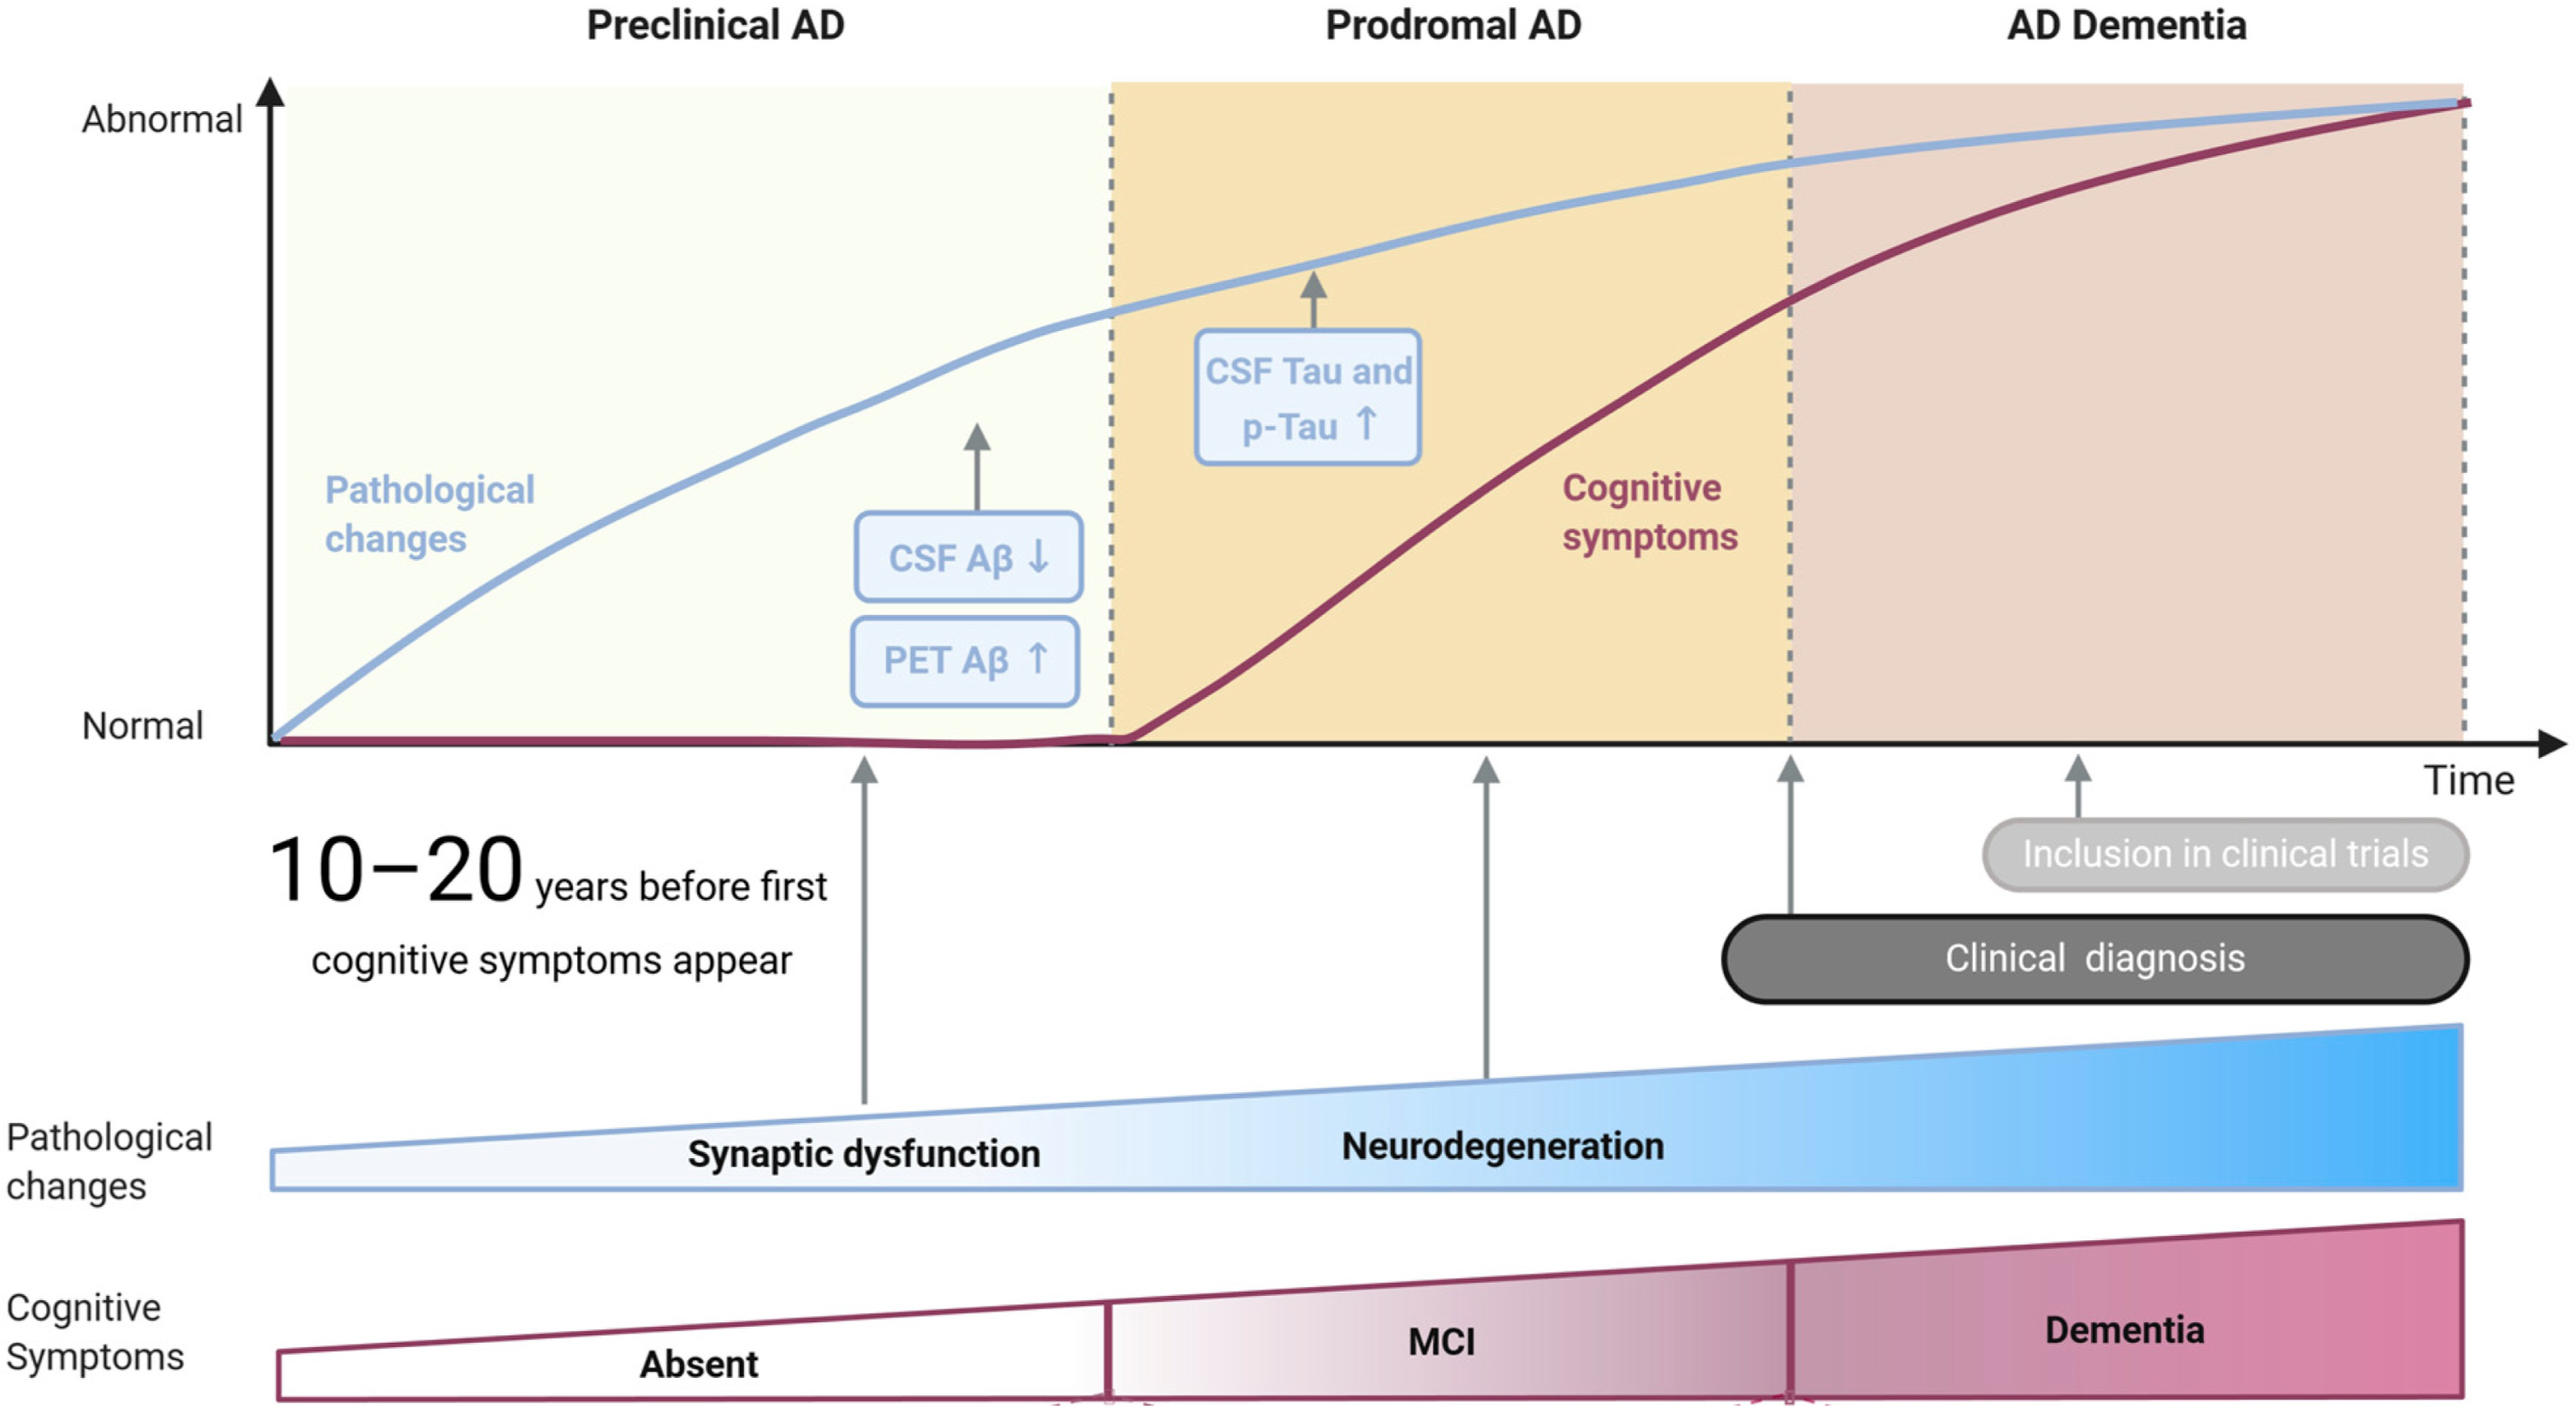 Three subsequent stages of Alzheimer’s disease: preclinical AD, prodromal AD, and AD dementia. Pathological changes are indicated by a blue line on the graph and at the bottom of the figure. Cognitive symptoms are indicated by a purple line and at the bottom of the figure. Aβ and tau are the pathological biomarkers currently used for AD. Adapted from [19].